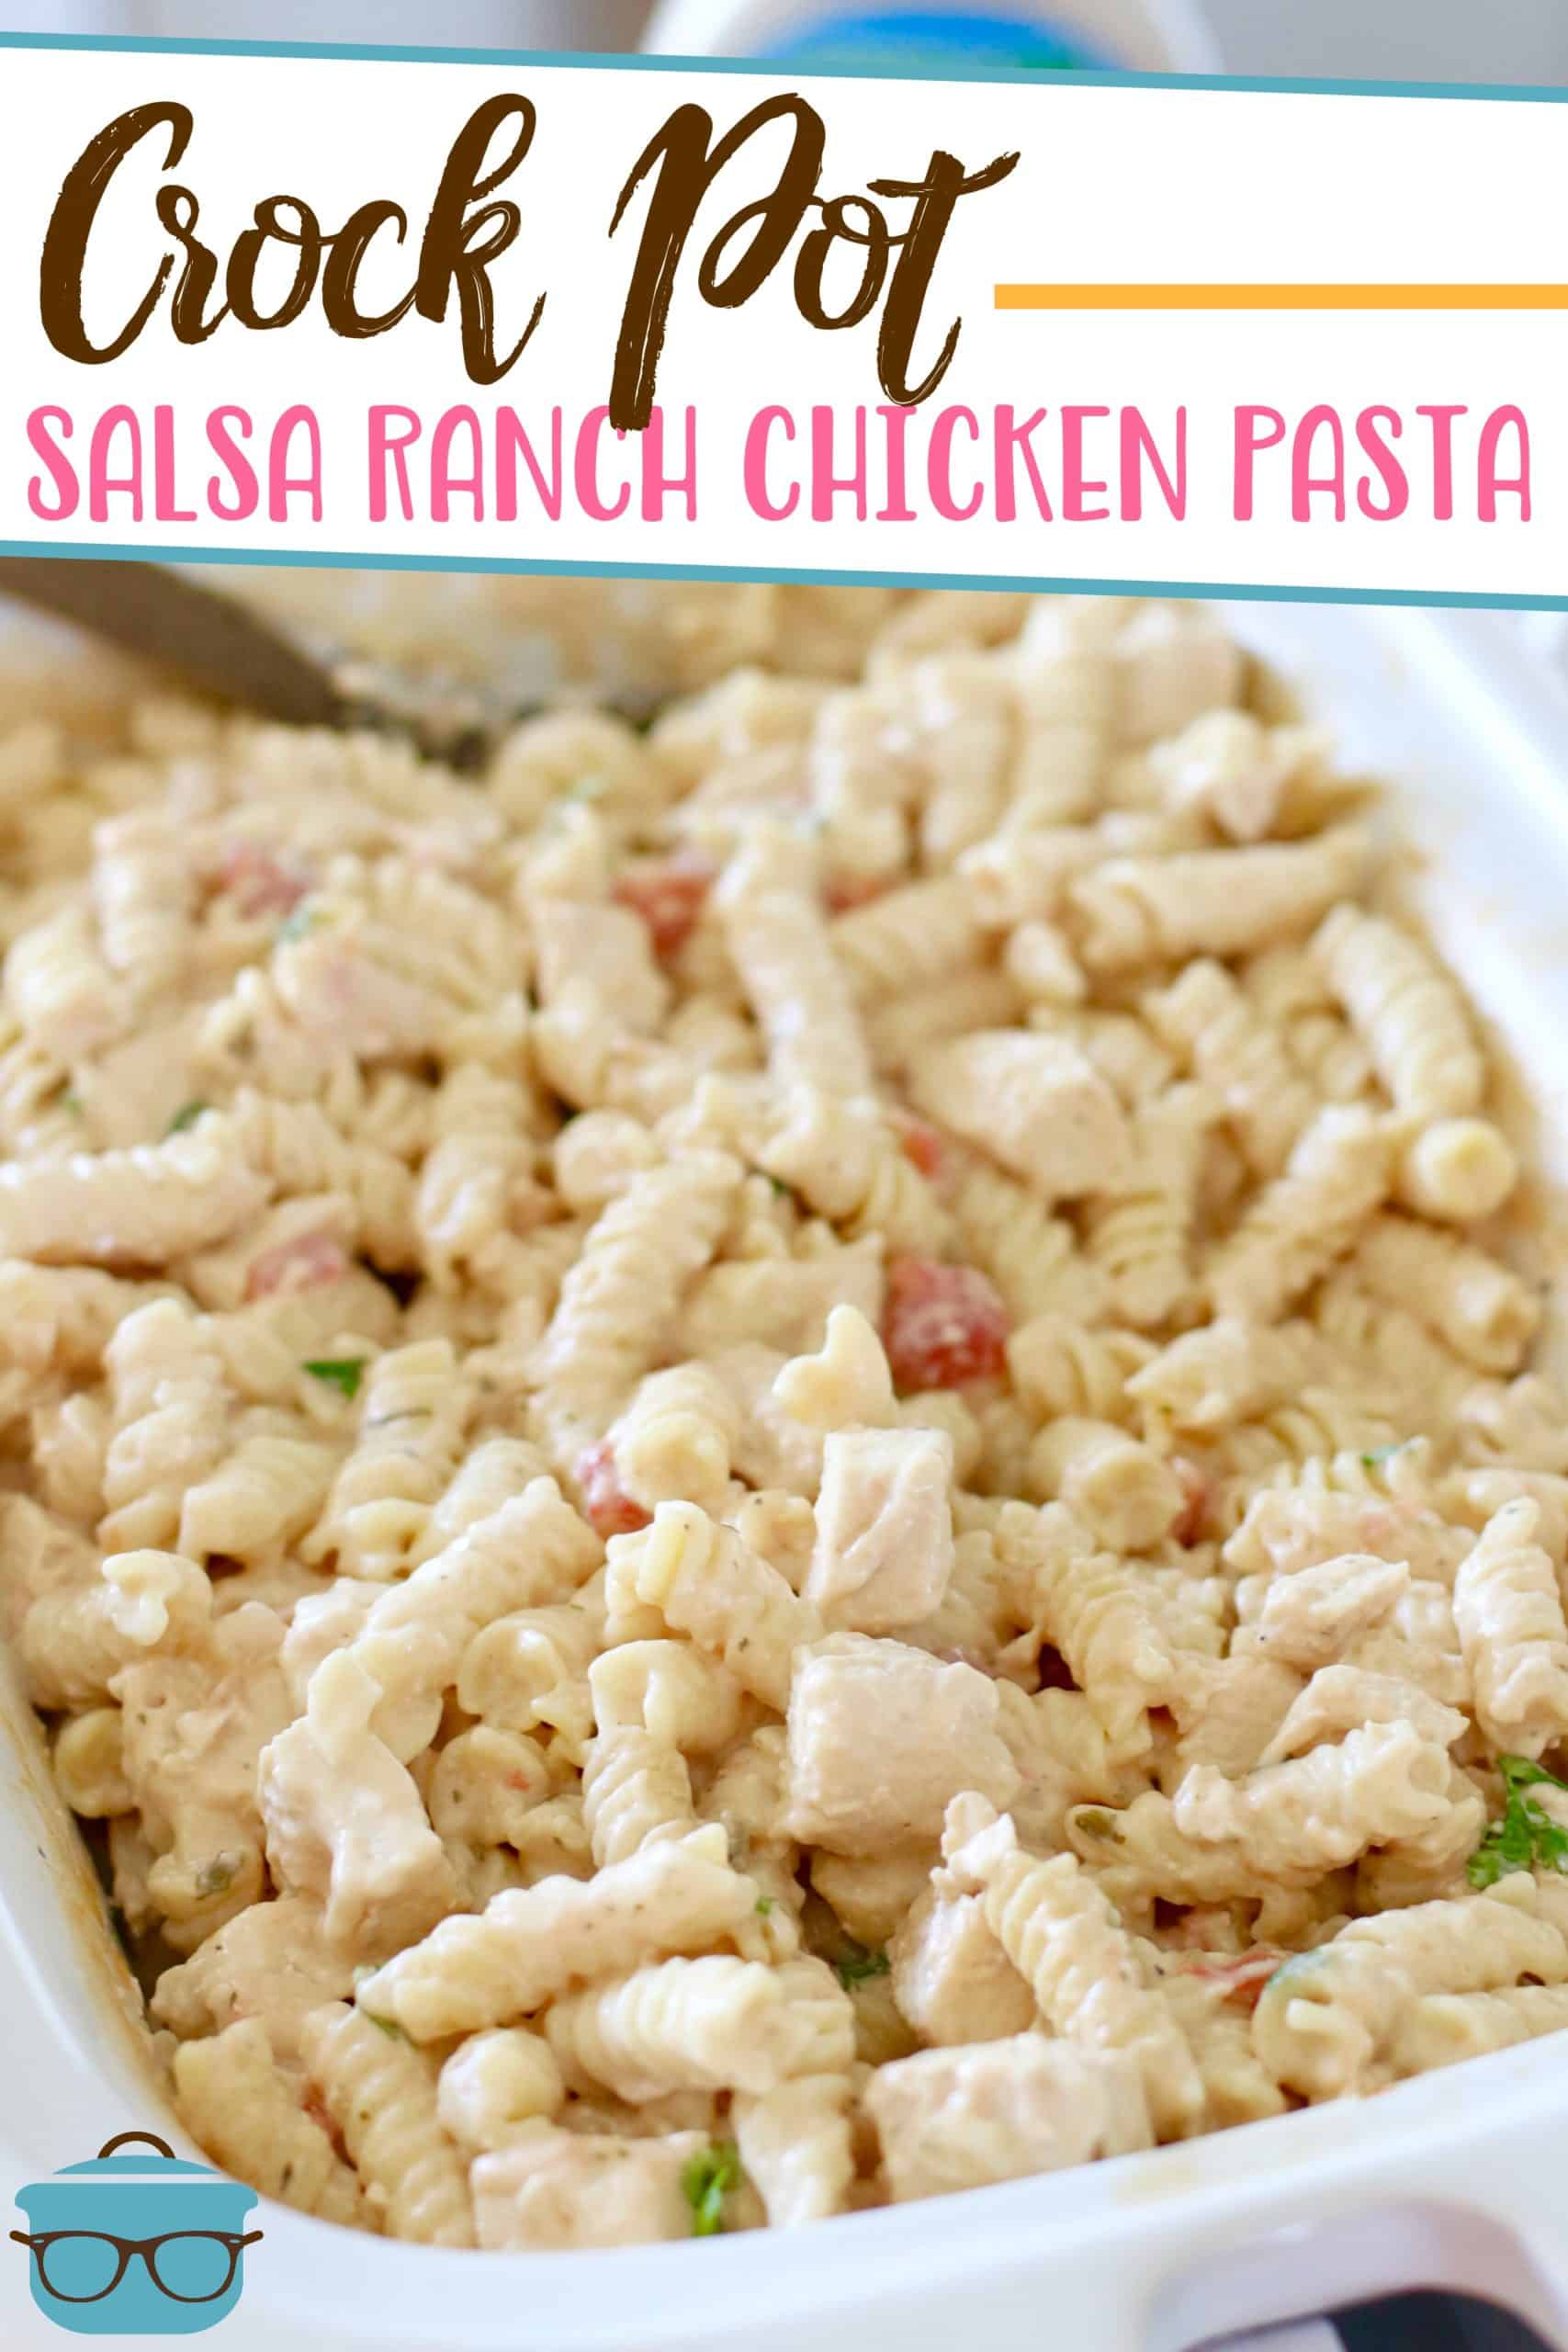 Crock Pot Salsa Ranch Chicken Pasta recipe from The Country Cook, photo showing fully cooked pasta meal in a rectangle white slow cooker.